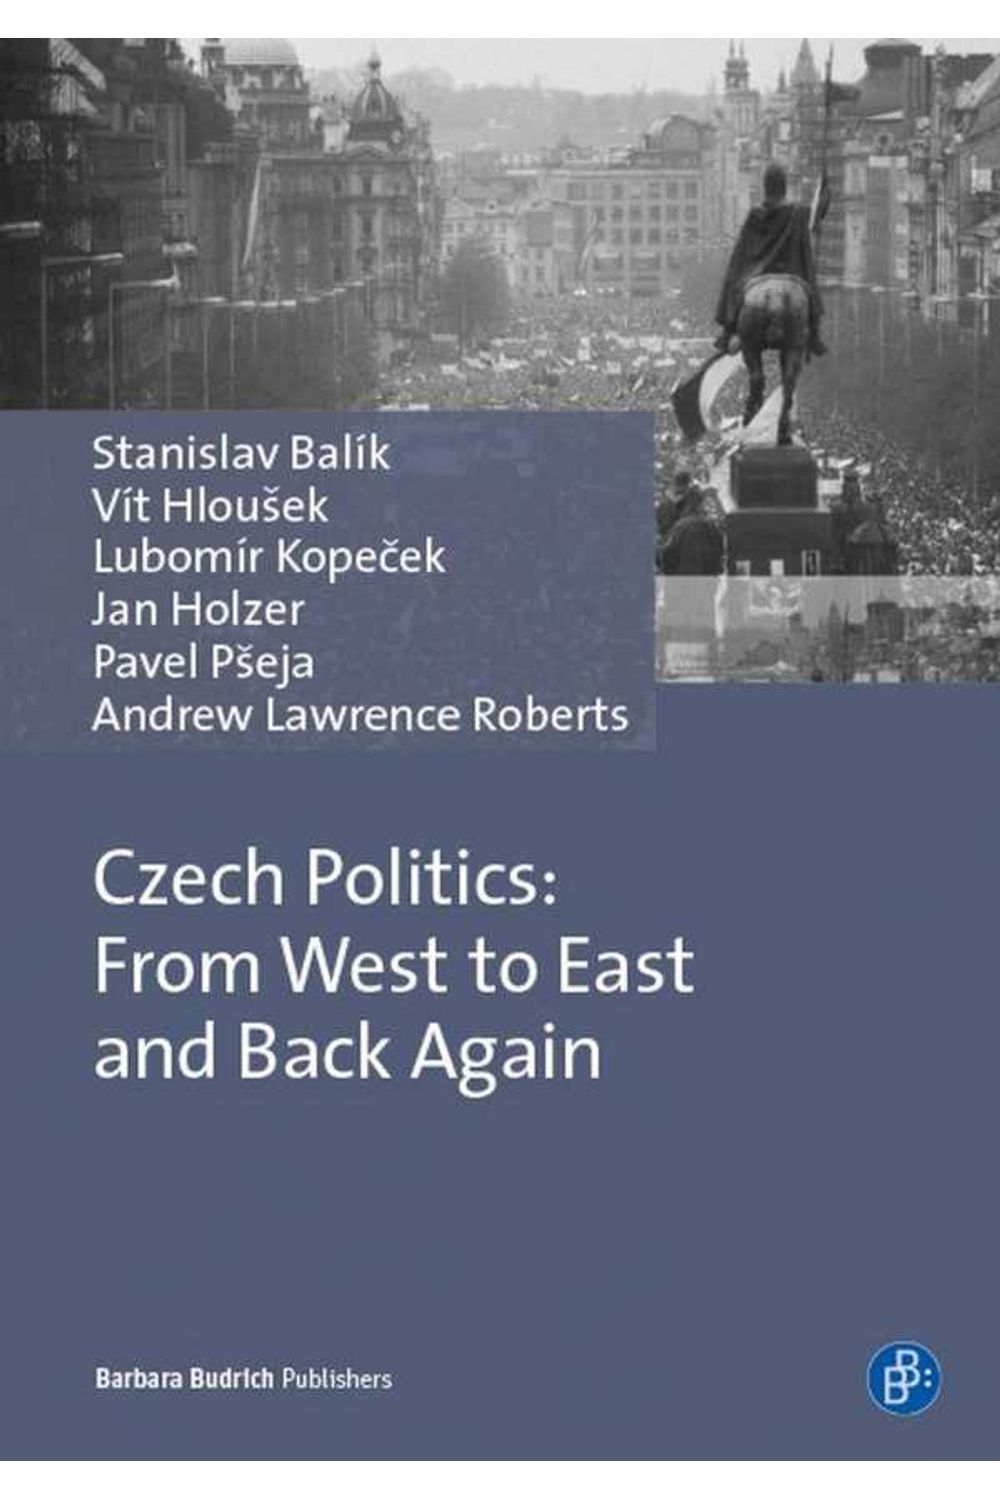 bw-czech-politics-from-west-to-east-and-back-again-verlag-barbara-budrich-9783847409748